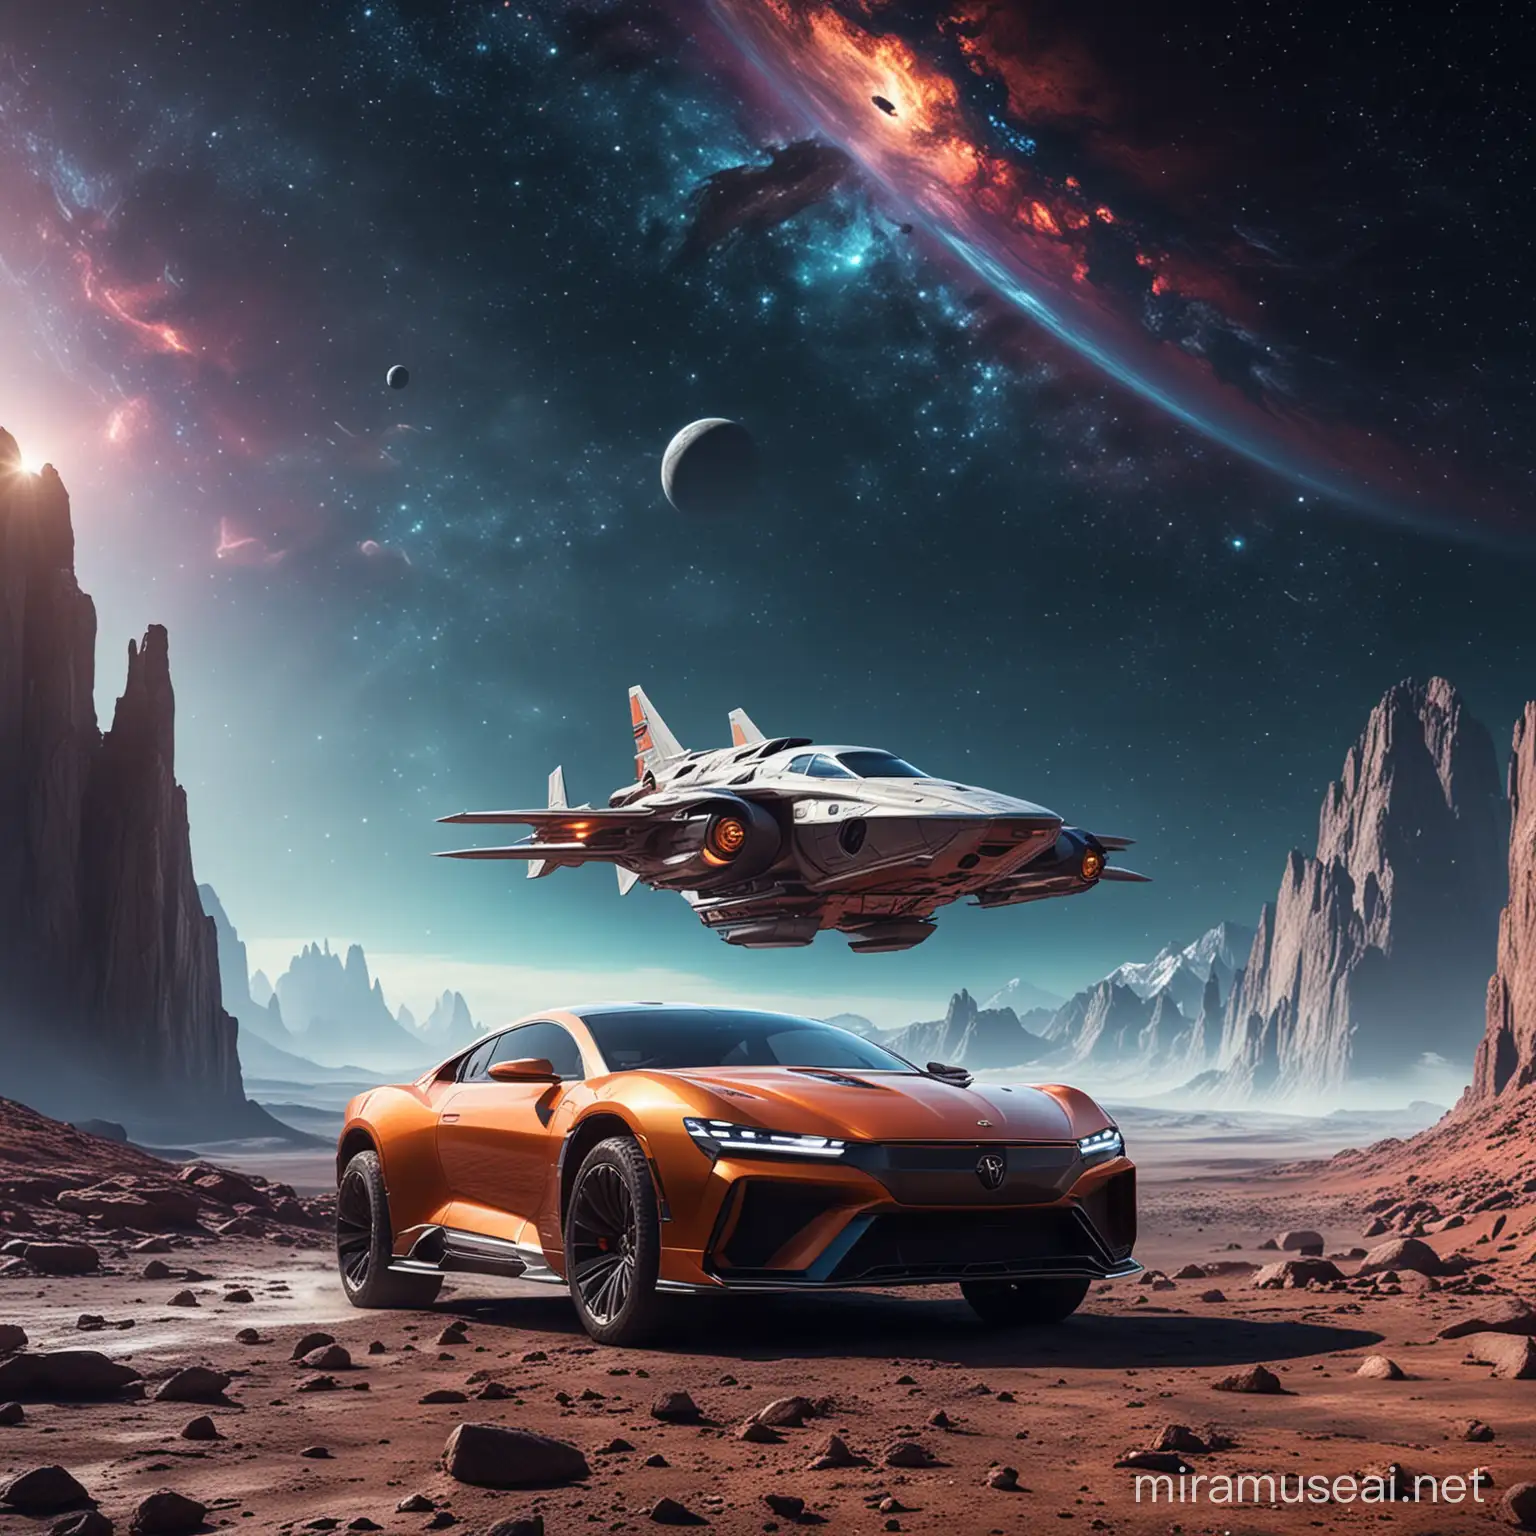 A luxury car in space, colorful atmosphere, rocky mountainous area, space ship at distance, realistic 